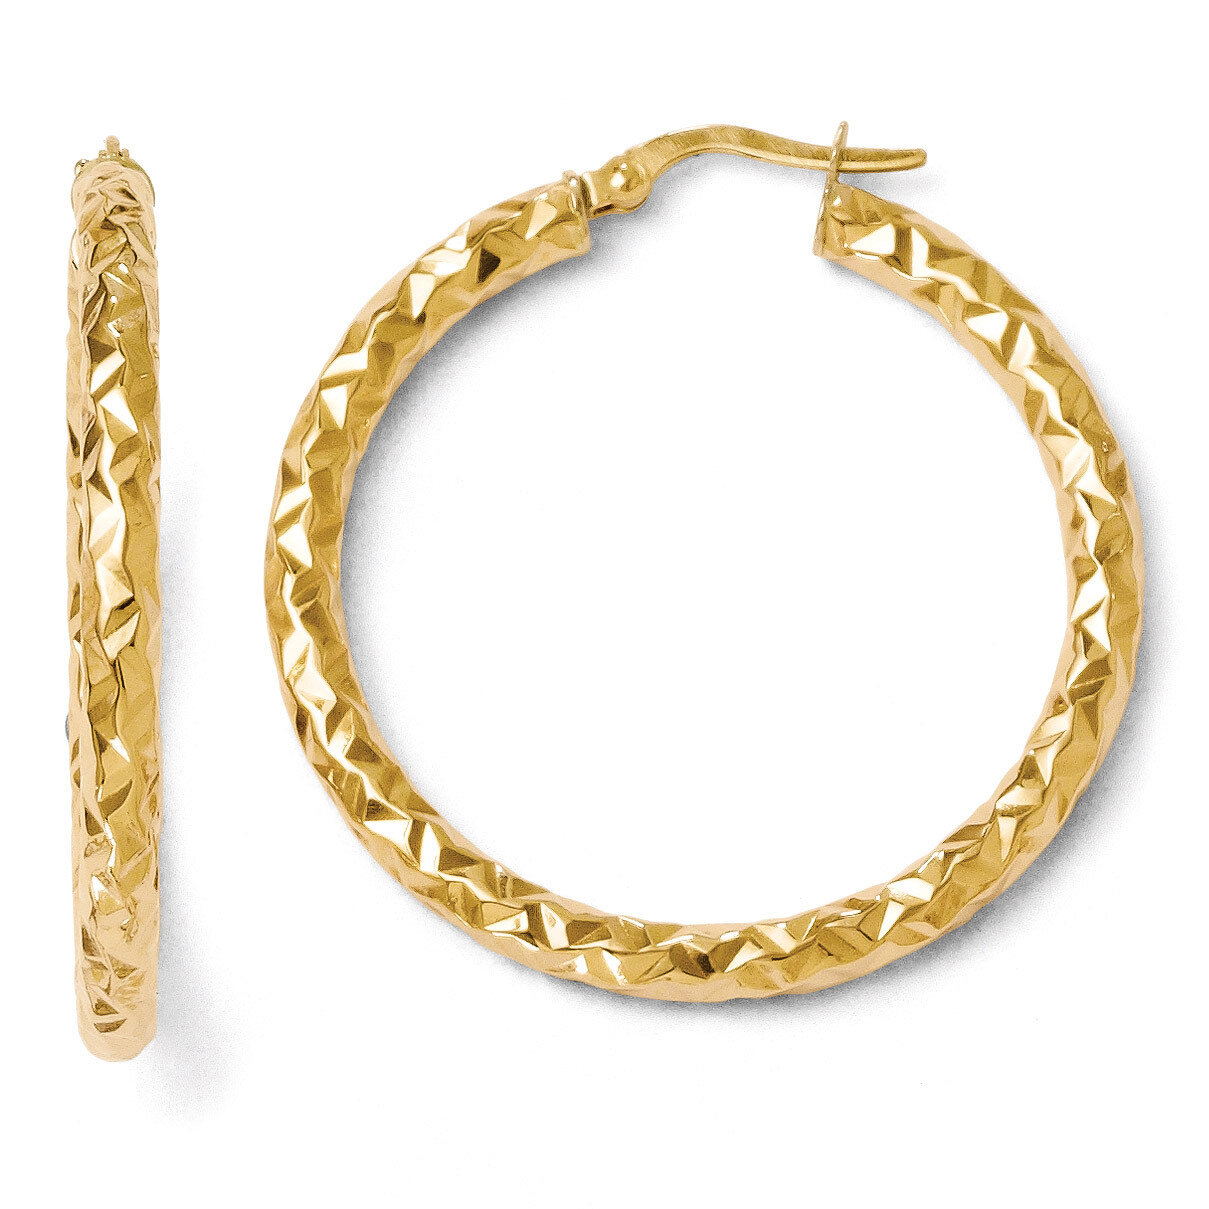 ForeverLite Polished and Textured Hoop Earrings - 14k Gold HB-LE440